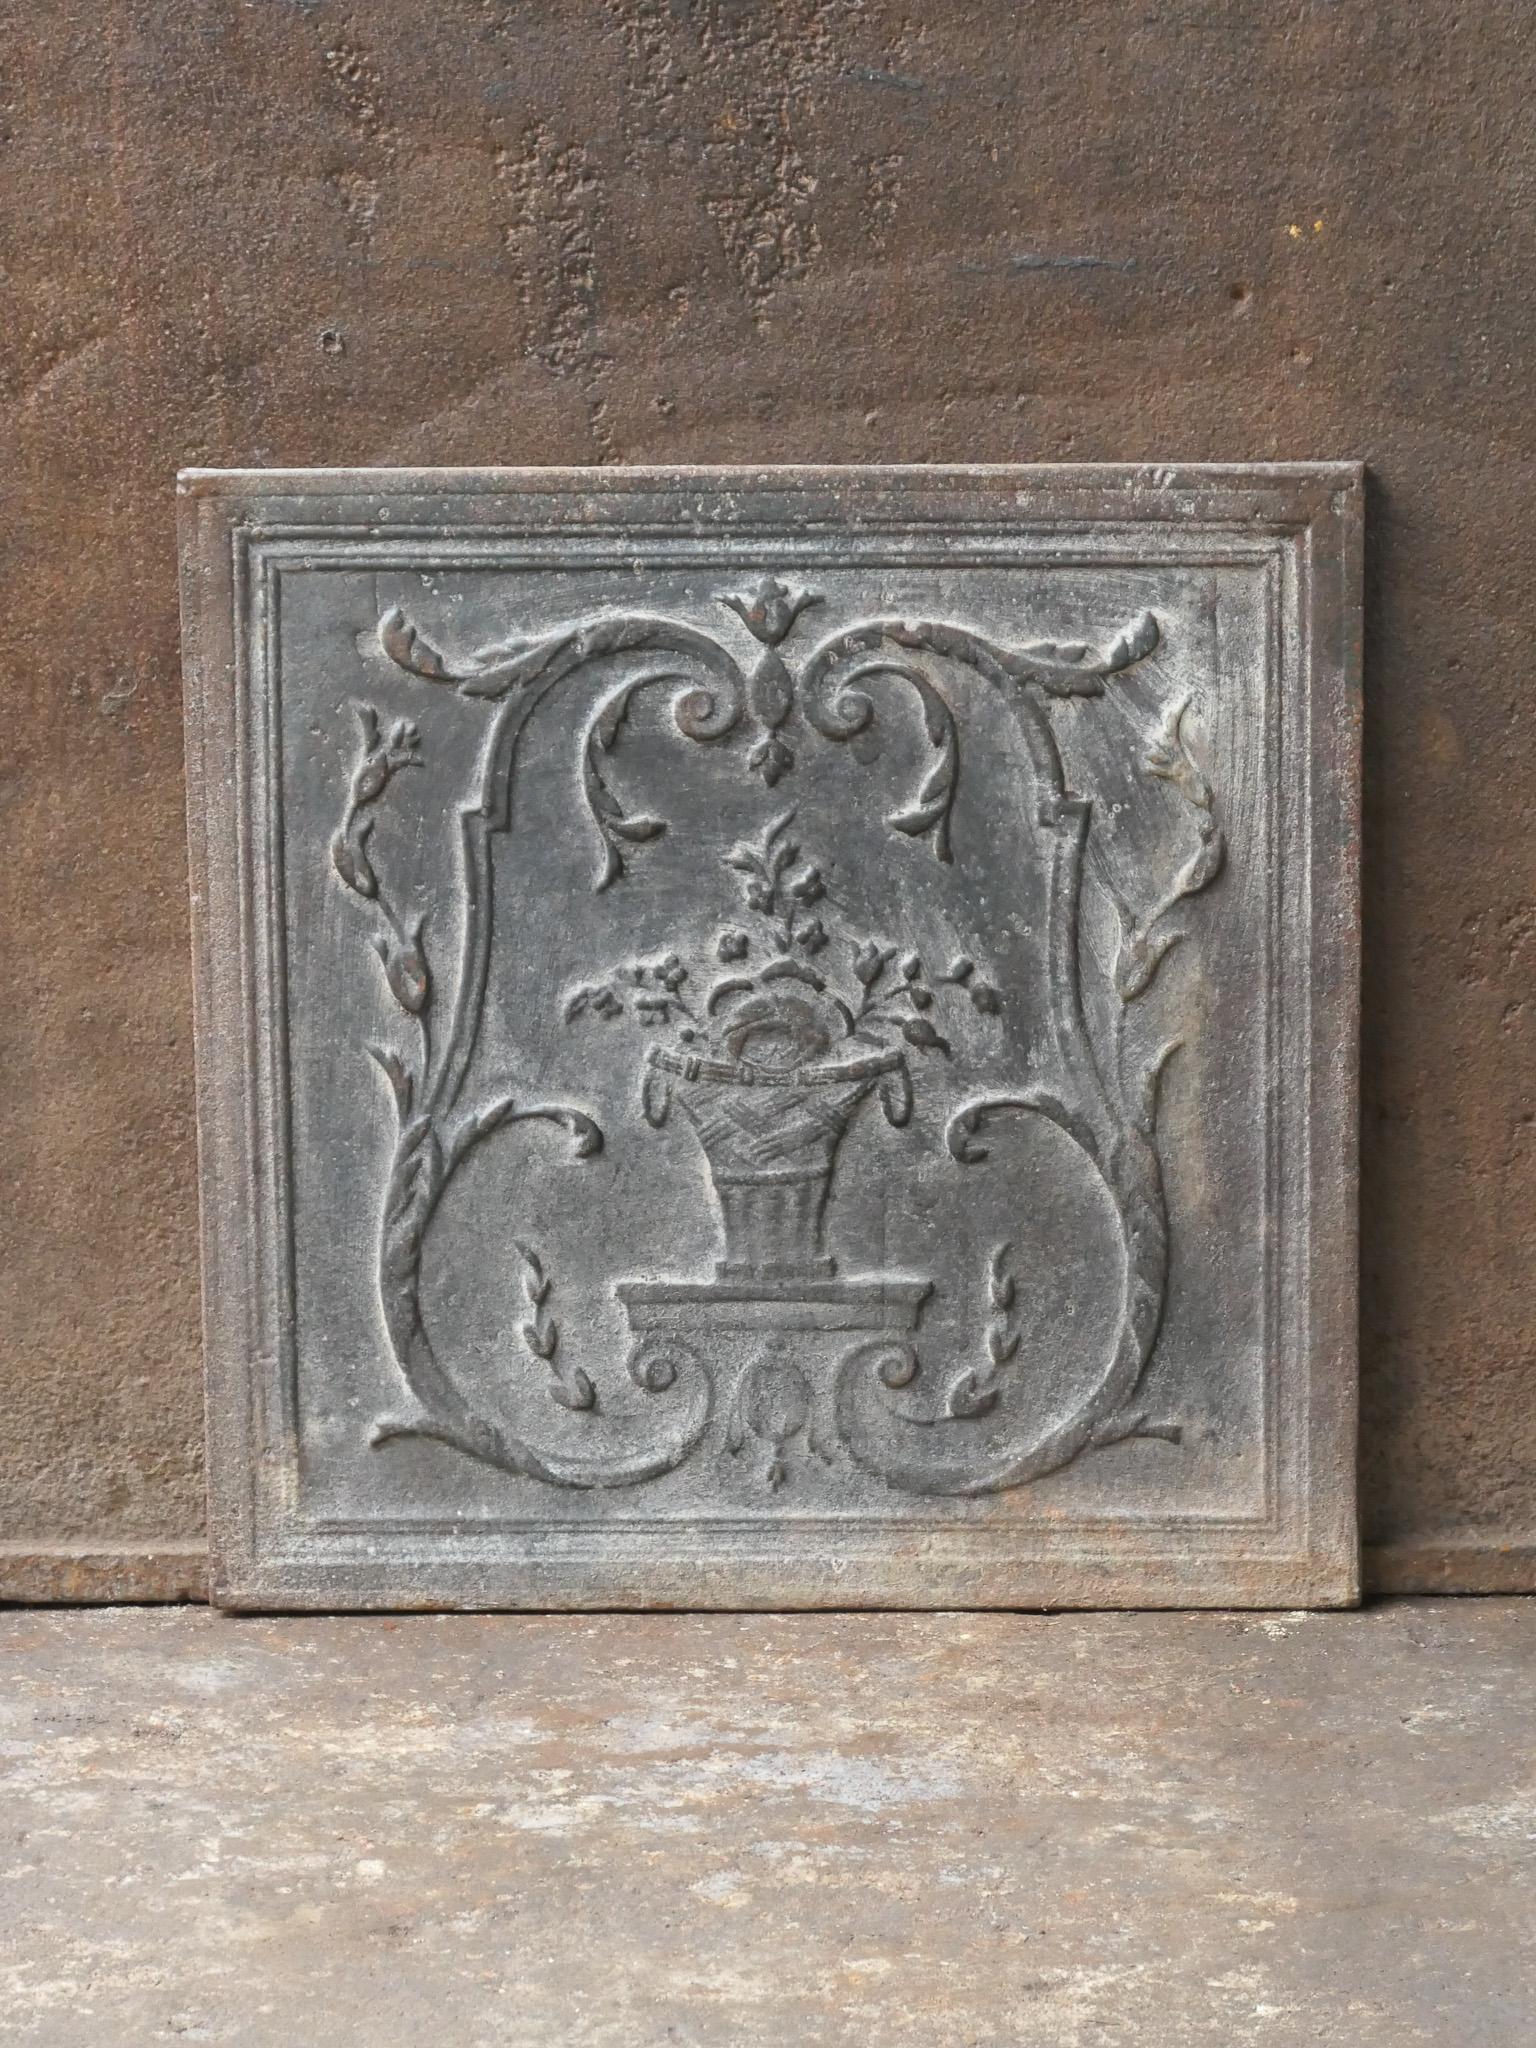 18th - 19th century French neoclassical period fireback with a flower basket.

The fireback is made of cast iron and has a natural brown patina. Upon request it can be made black / pewter. The fireback is in good condition and fit for use in the